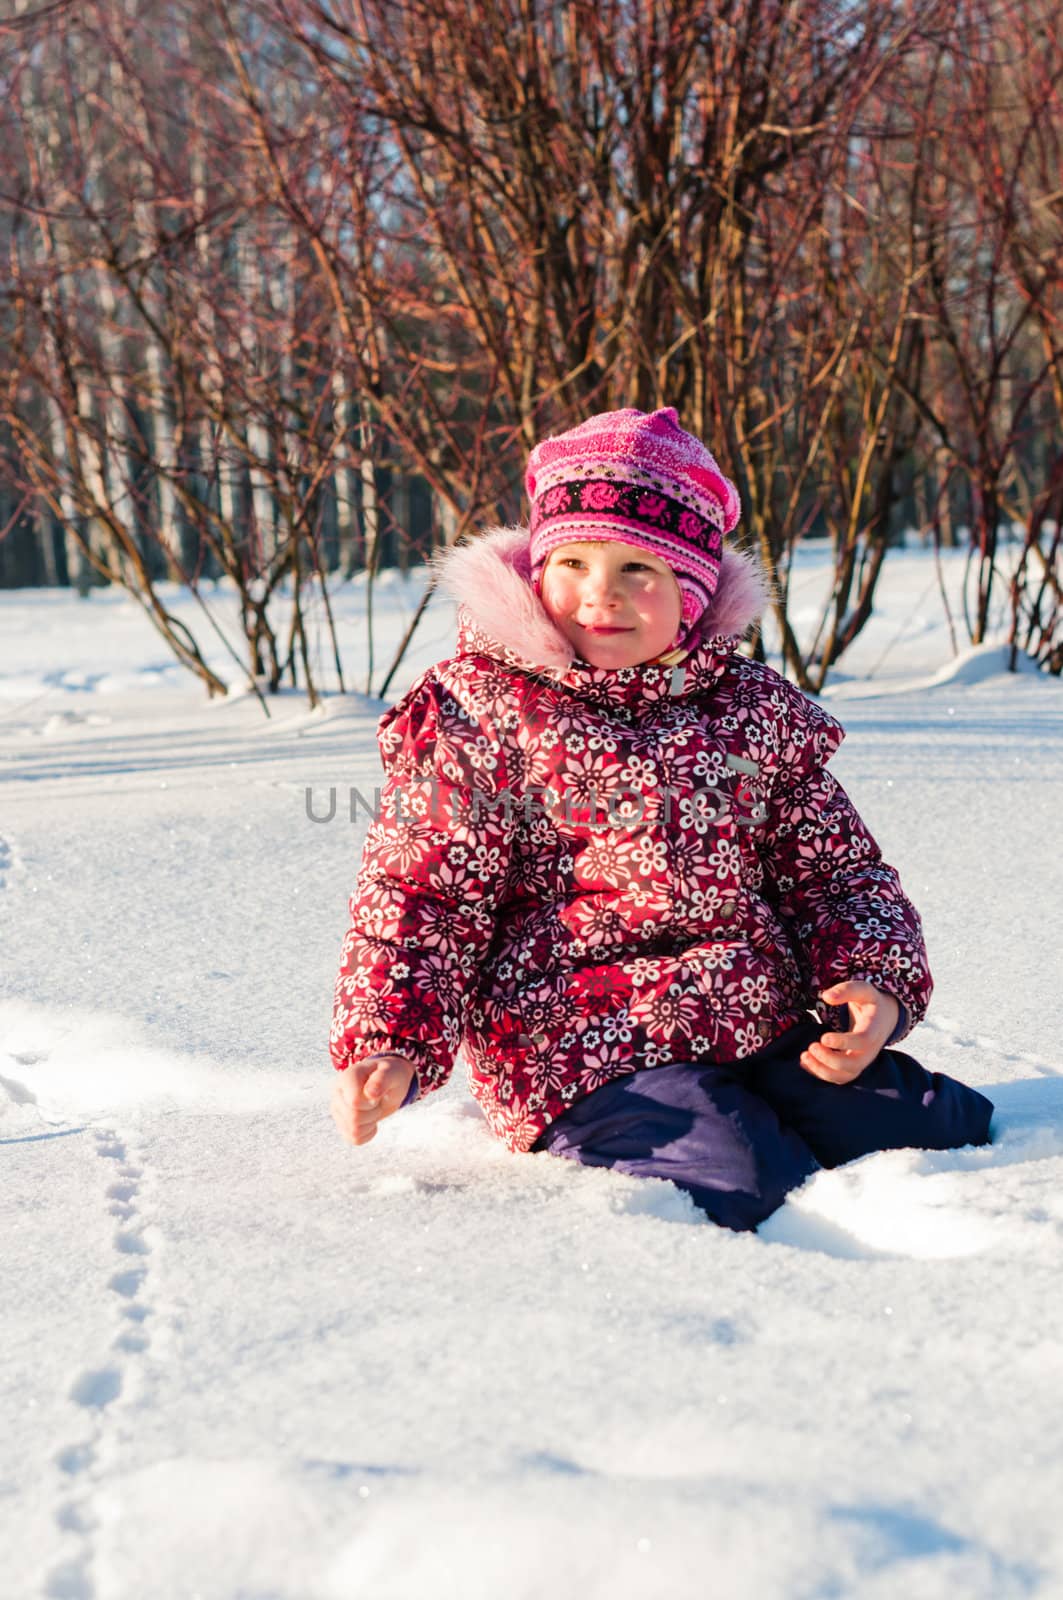 Baby sits on snow and looks on the left side